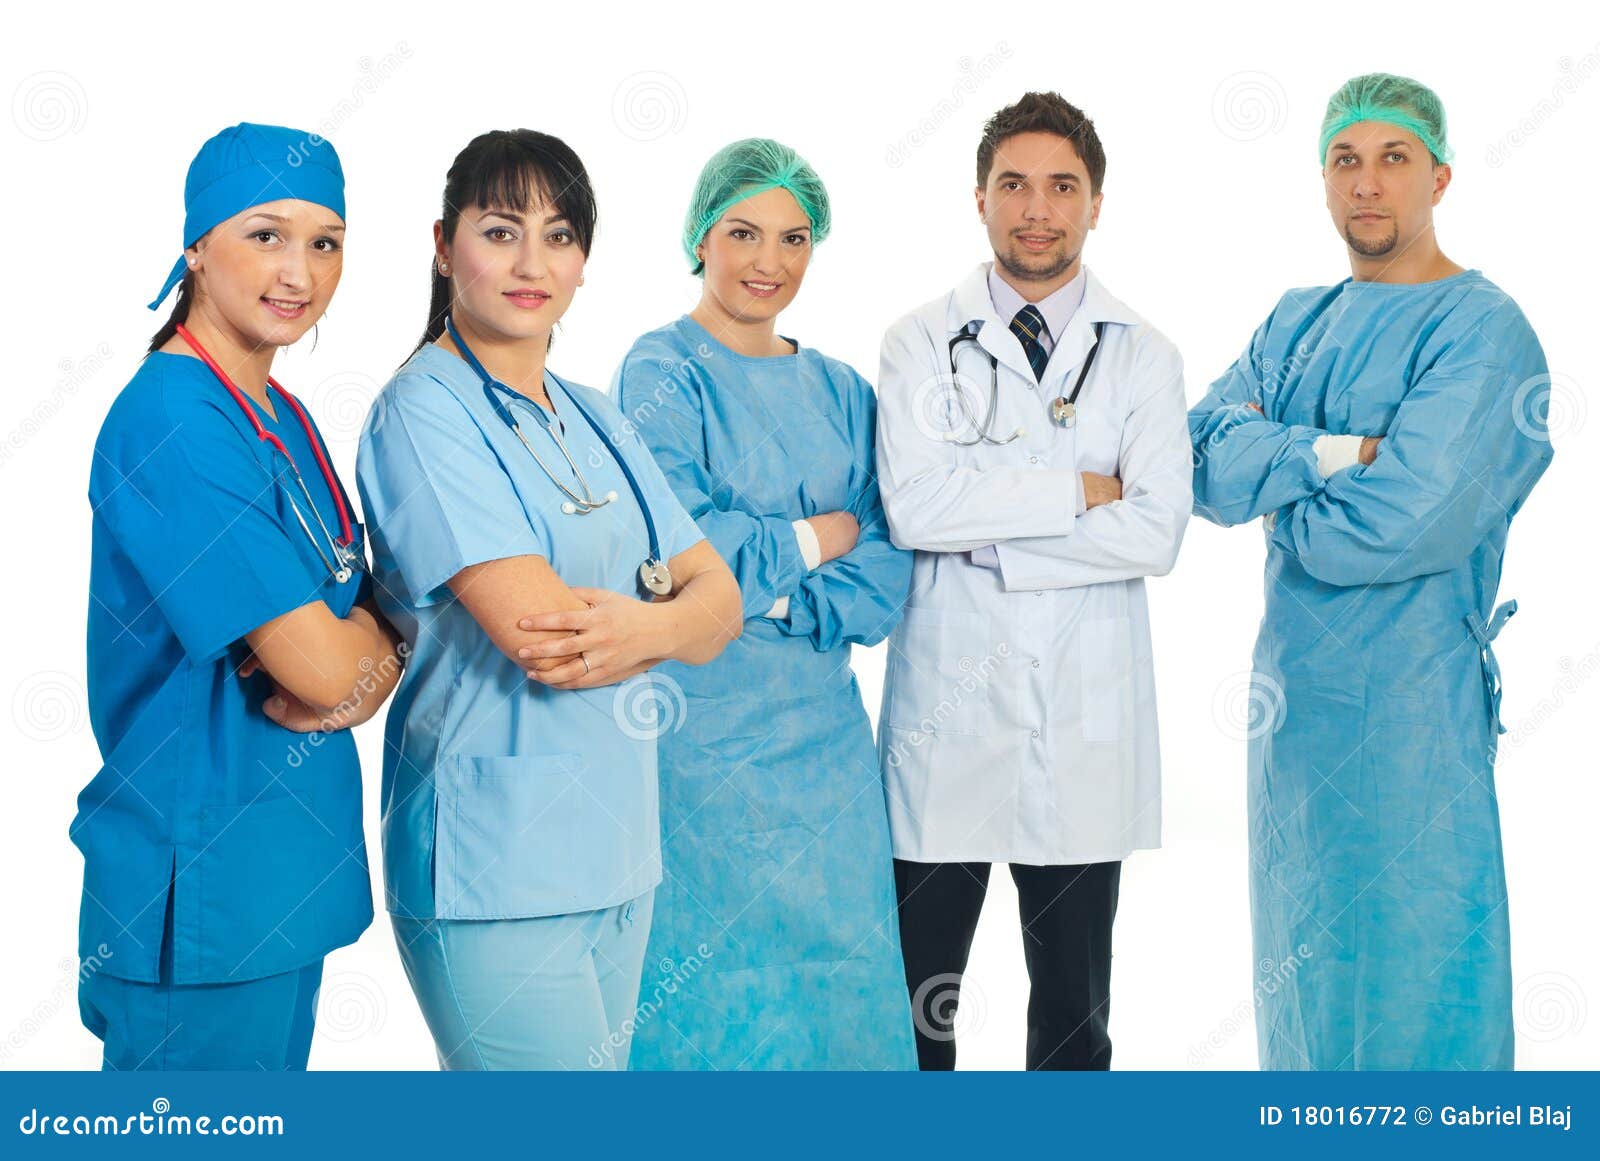 team of health care workers